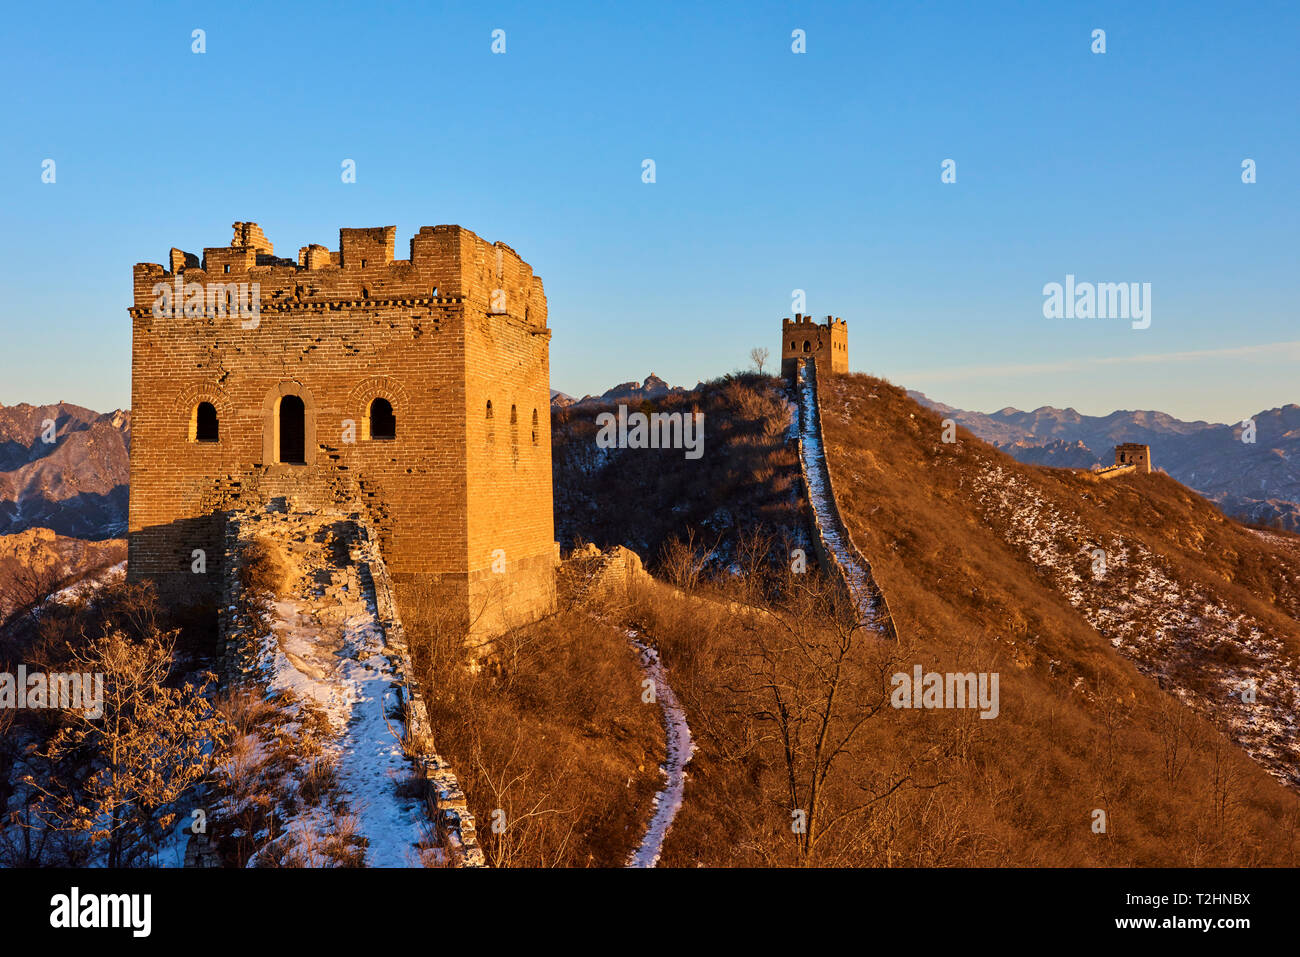 Sunlit towers of the Jinshanling and Simatai sections of the Great Wall of China, Unesco World Heritage Site, China, East Asia Stock Photo